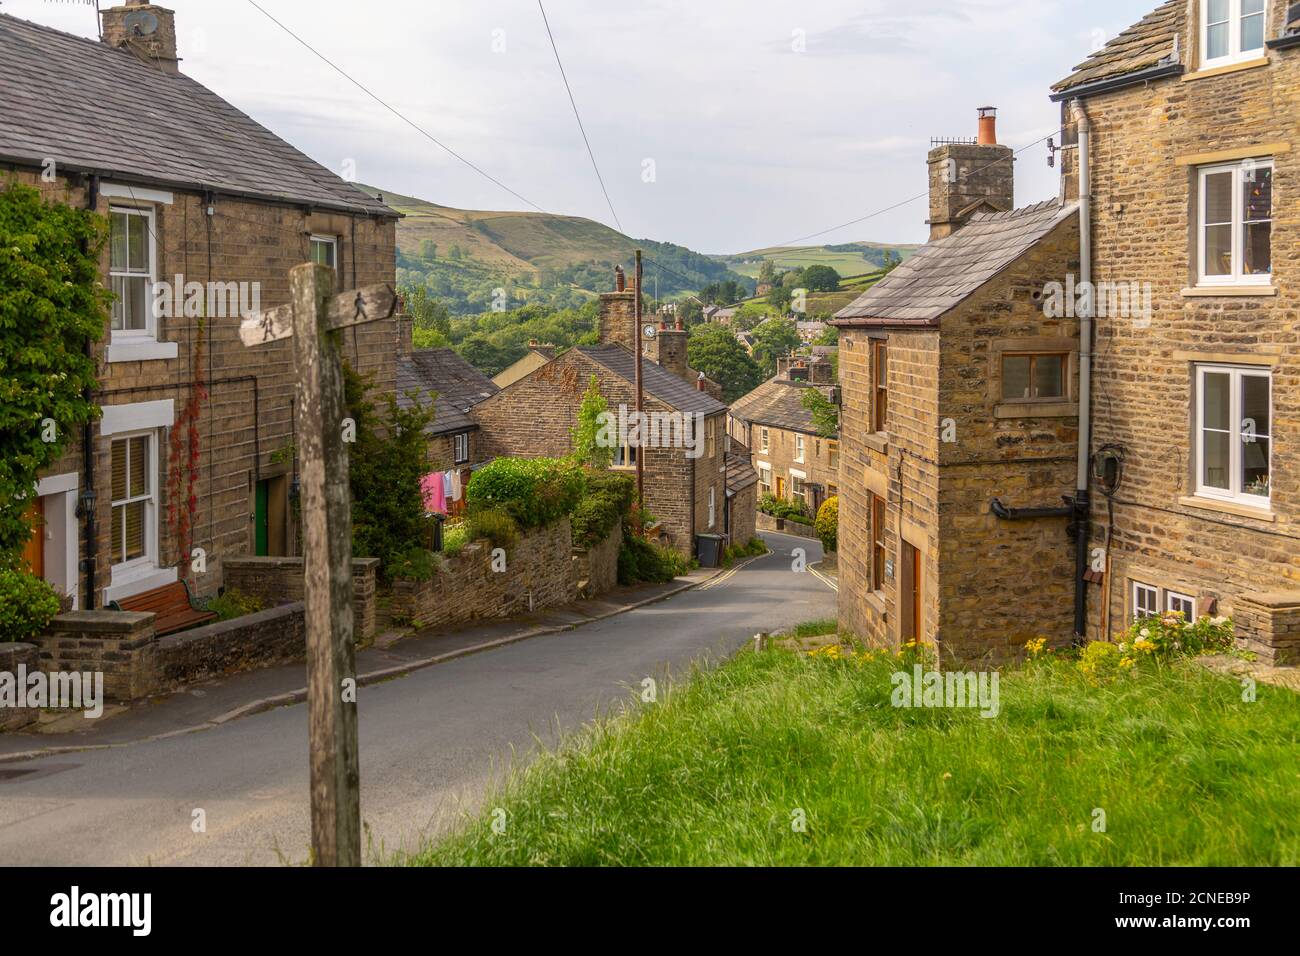 View of stone houses in the village of Hayfield, High Peak, Derbyshire, England, United Kingdom, Europe Stock Photo